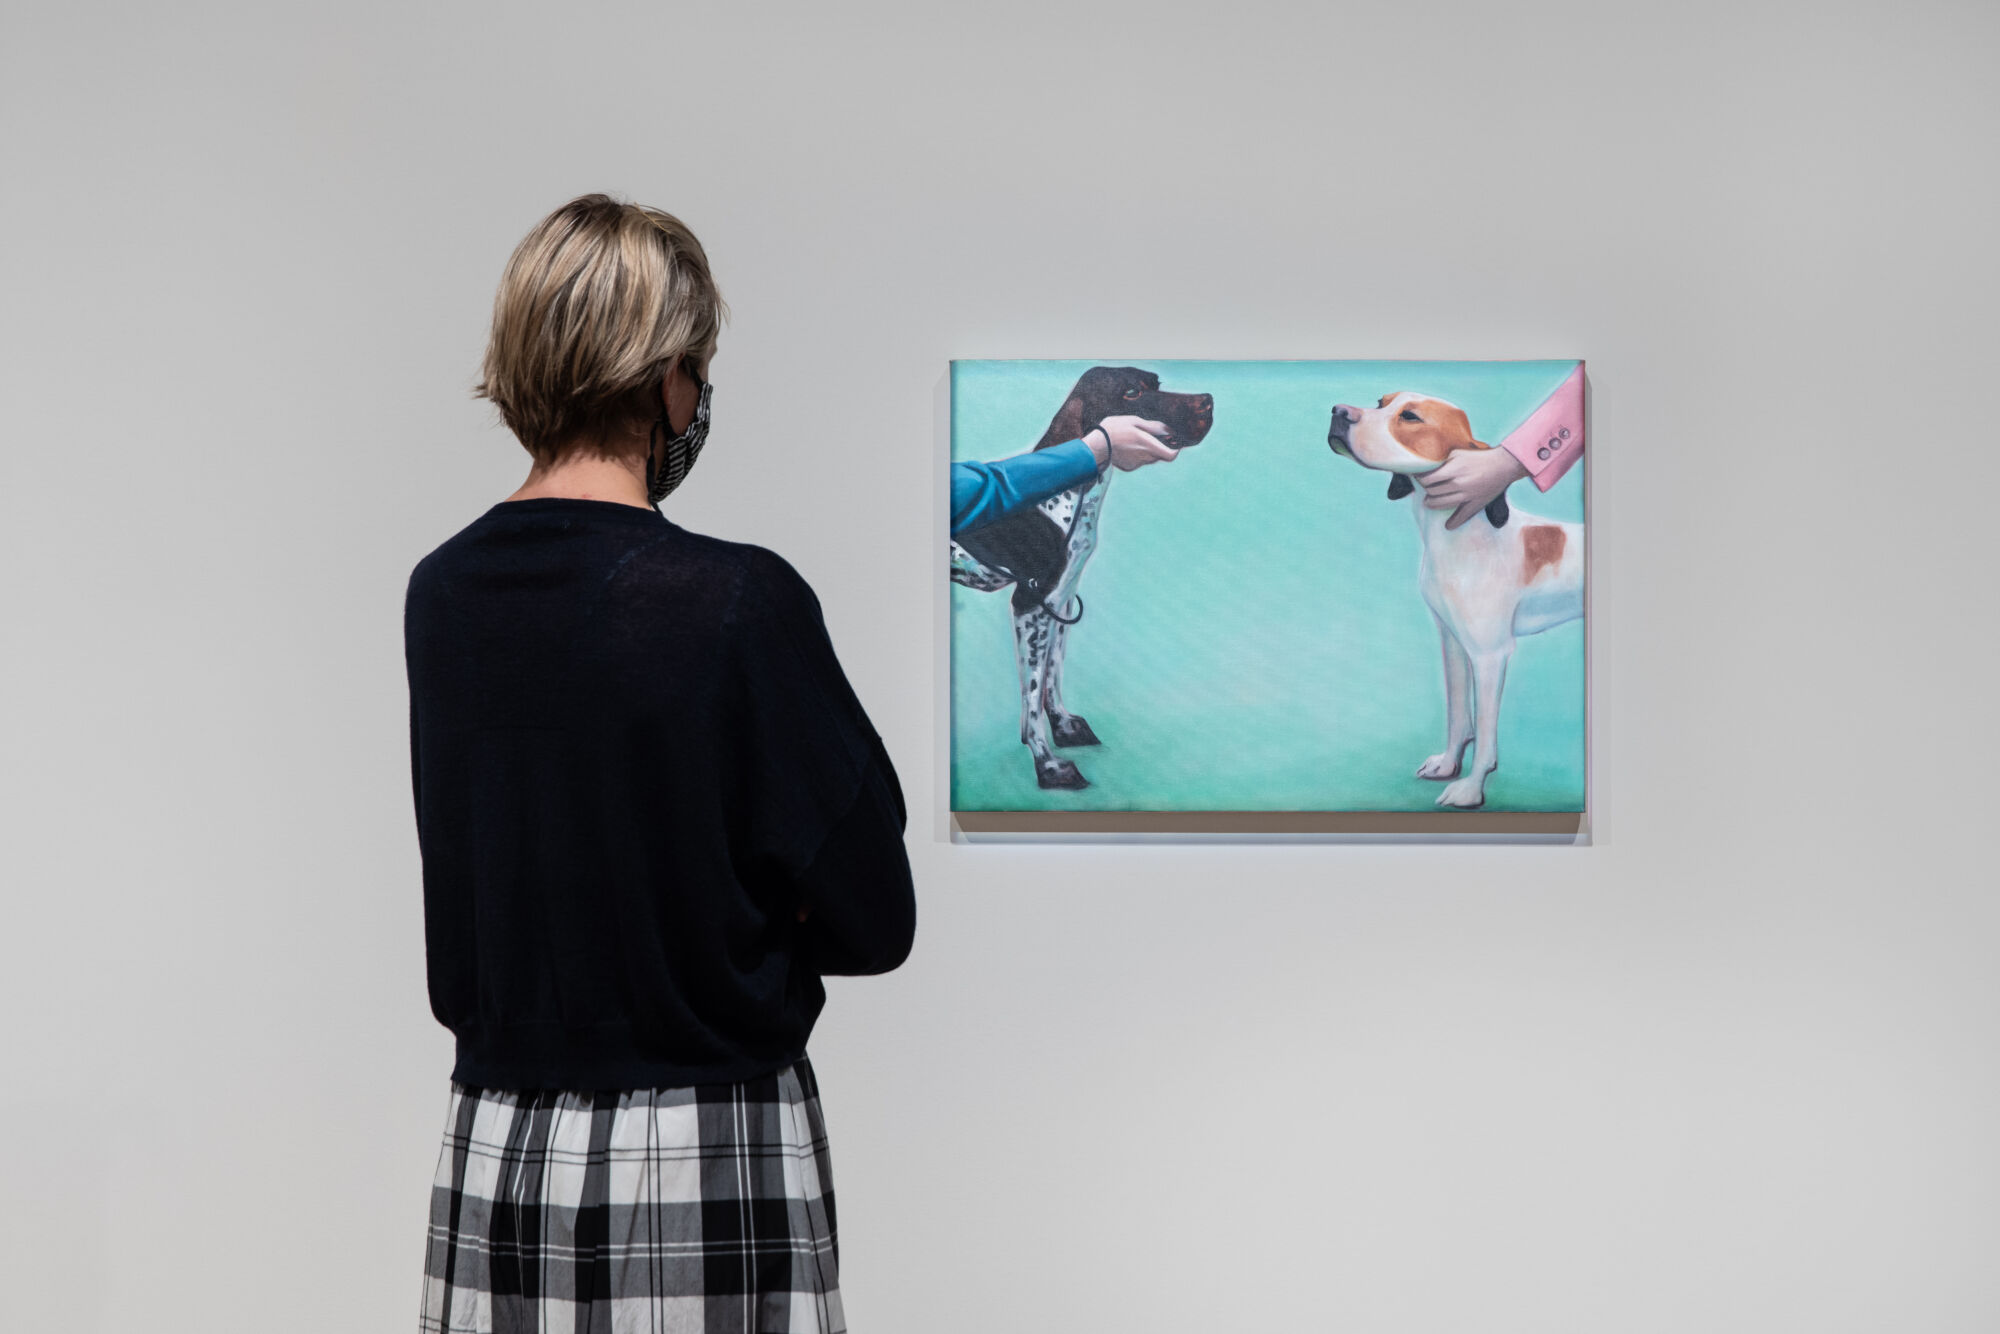 The Wick - Lydia Blakeley, Pointers, 2019, in Mixing It Up Painting Today at Hayward Gallery, 2021. © Lydia Blakeley 2021. Courtesy of Hayward Gallery. Photo Rob Harris